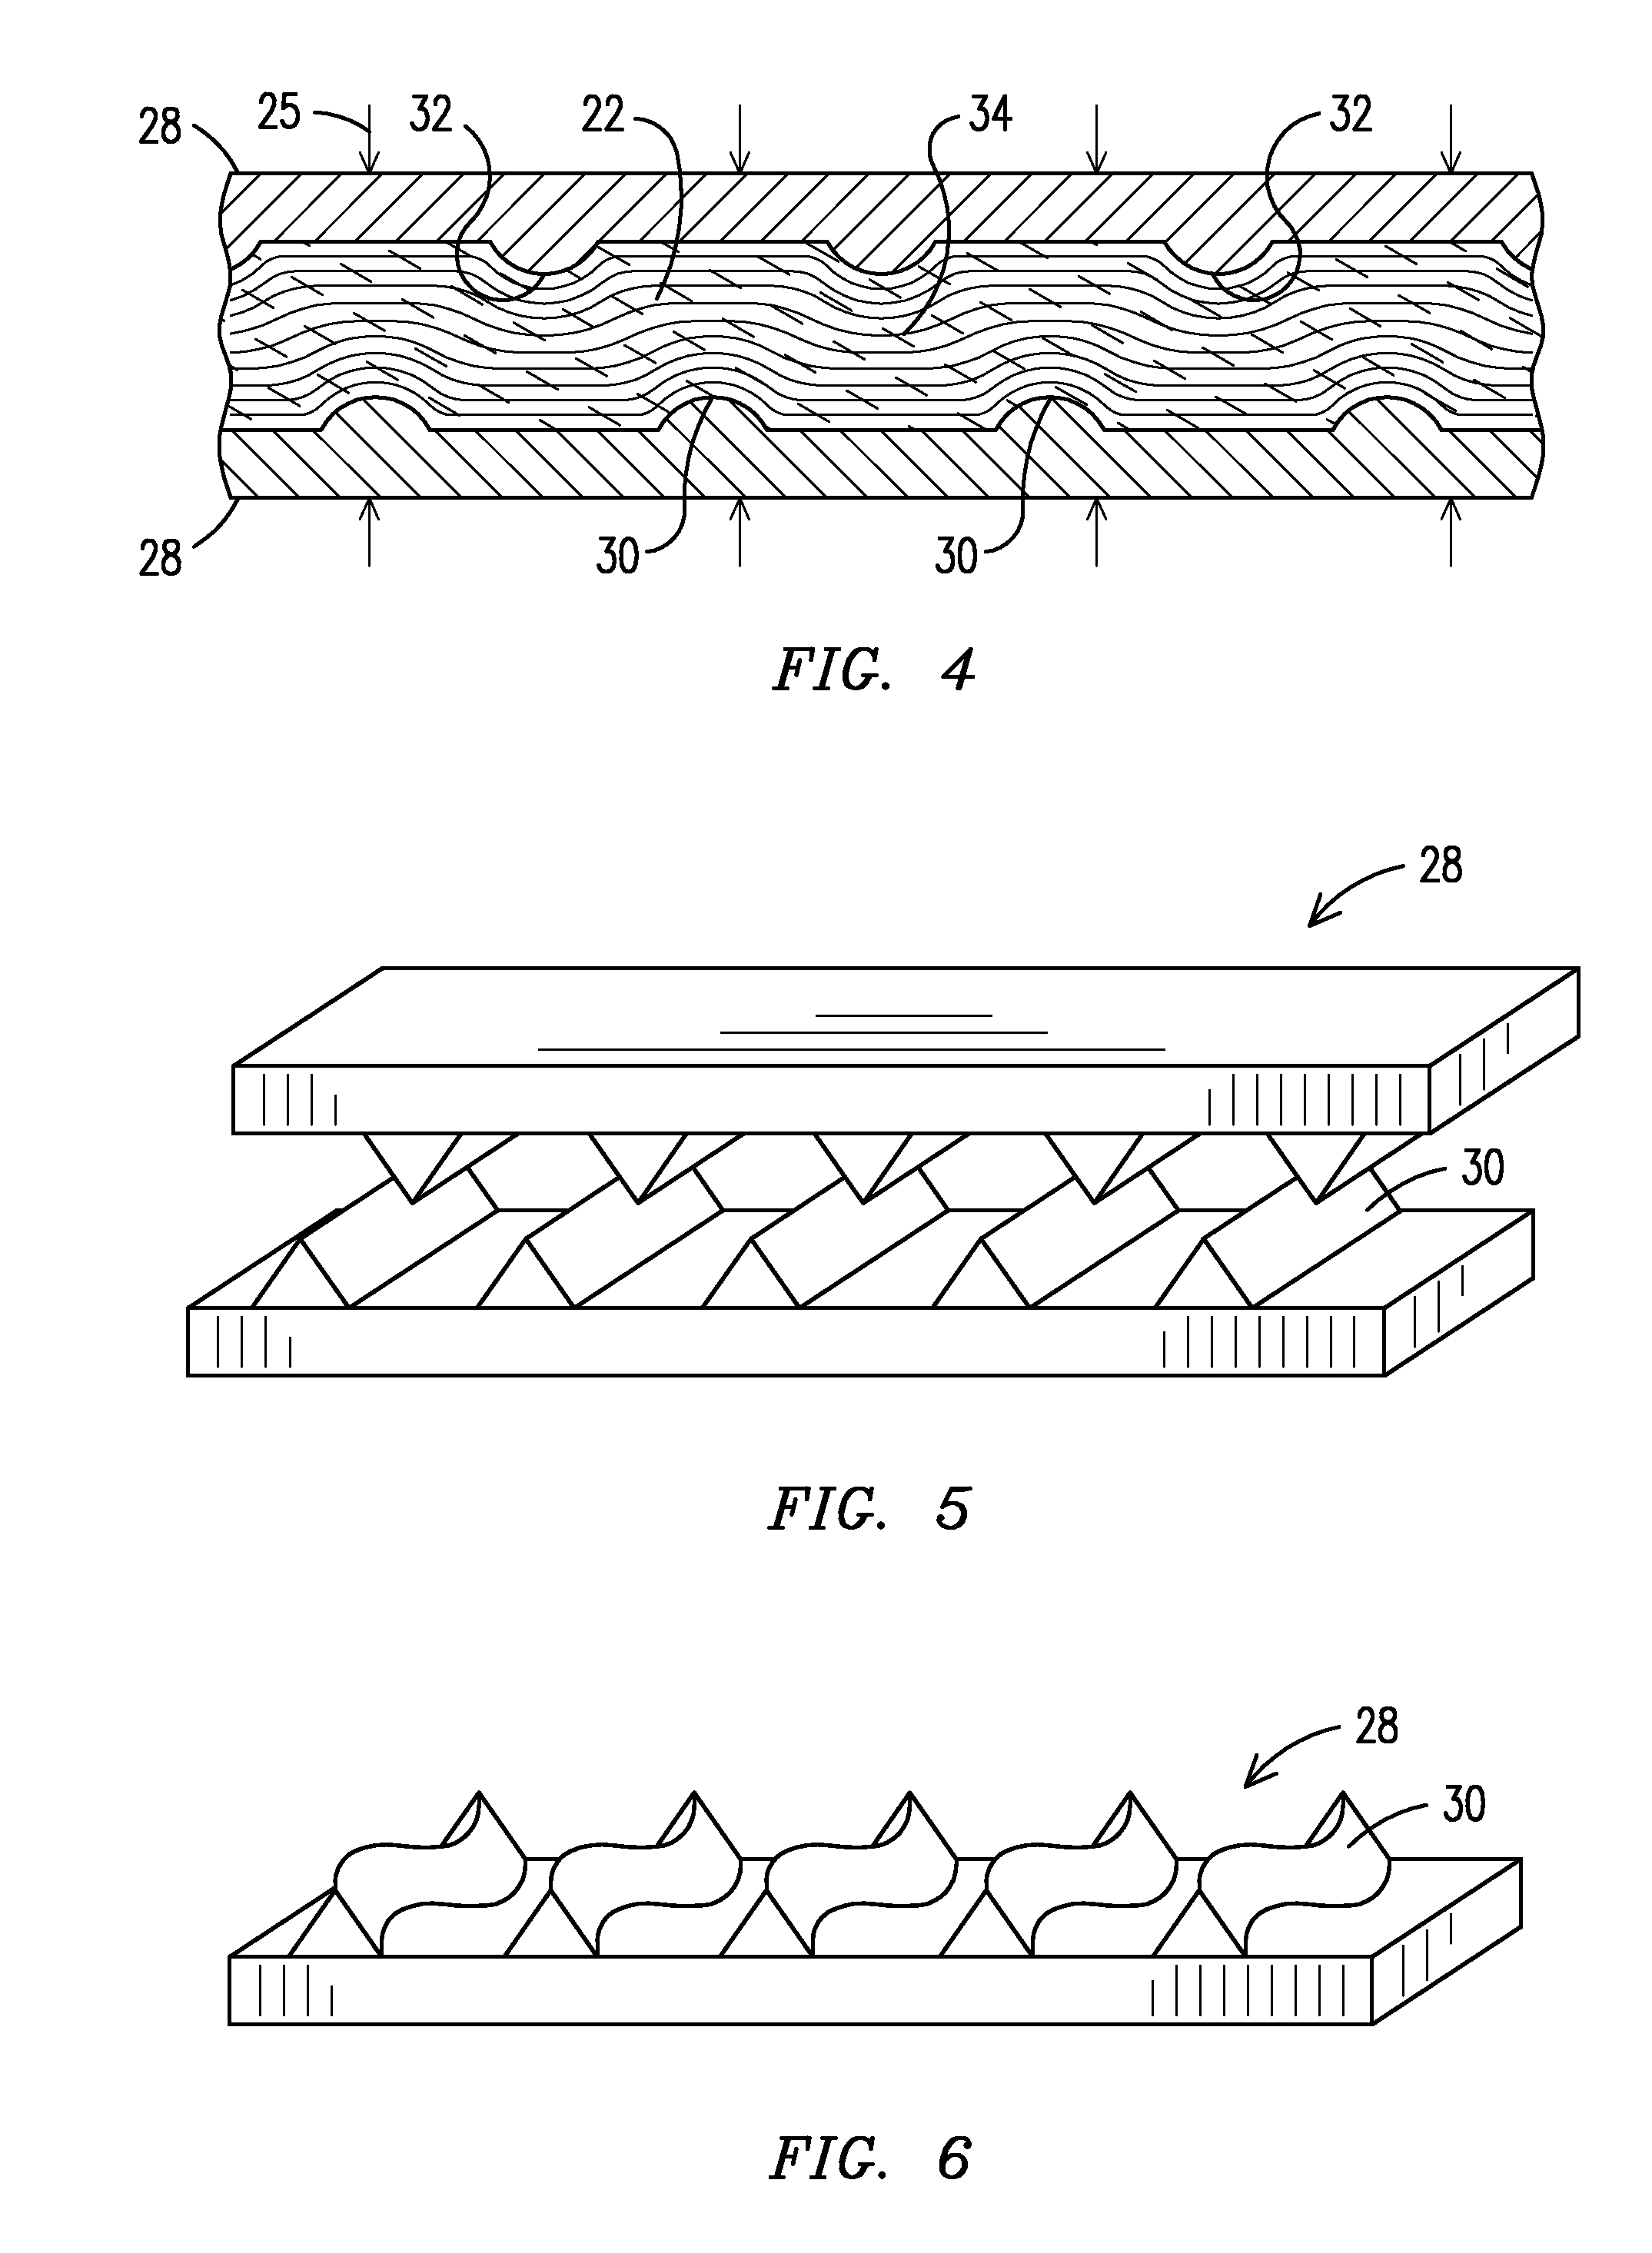 Methodology and tooling arrangements for increasing interlaminar shear strength in a ceramic matrix composite structure